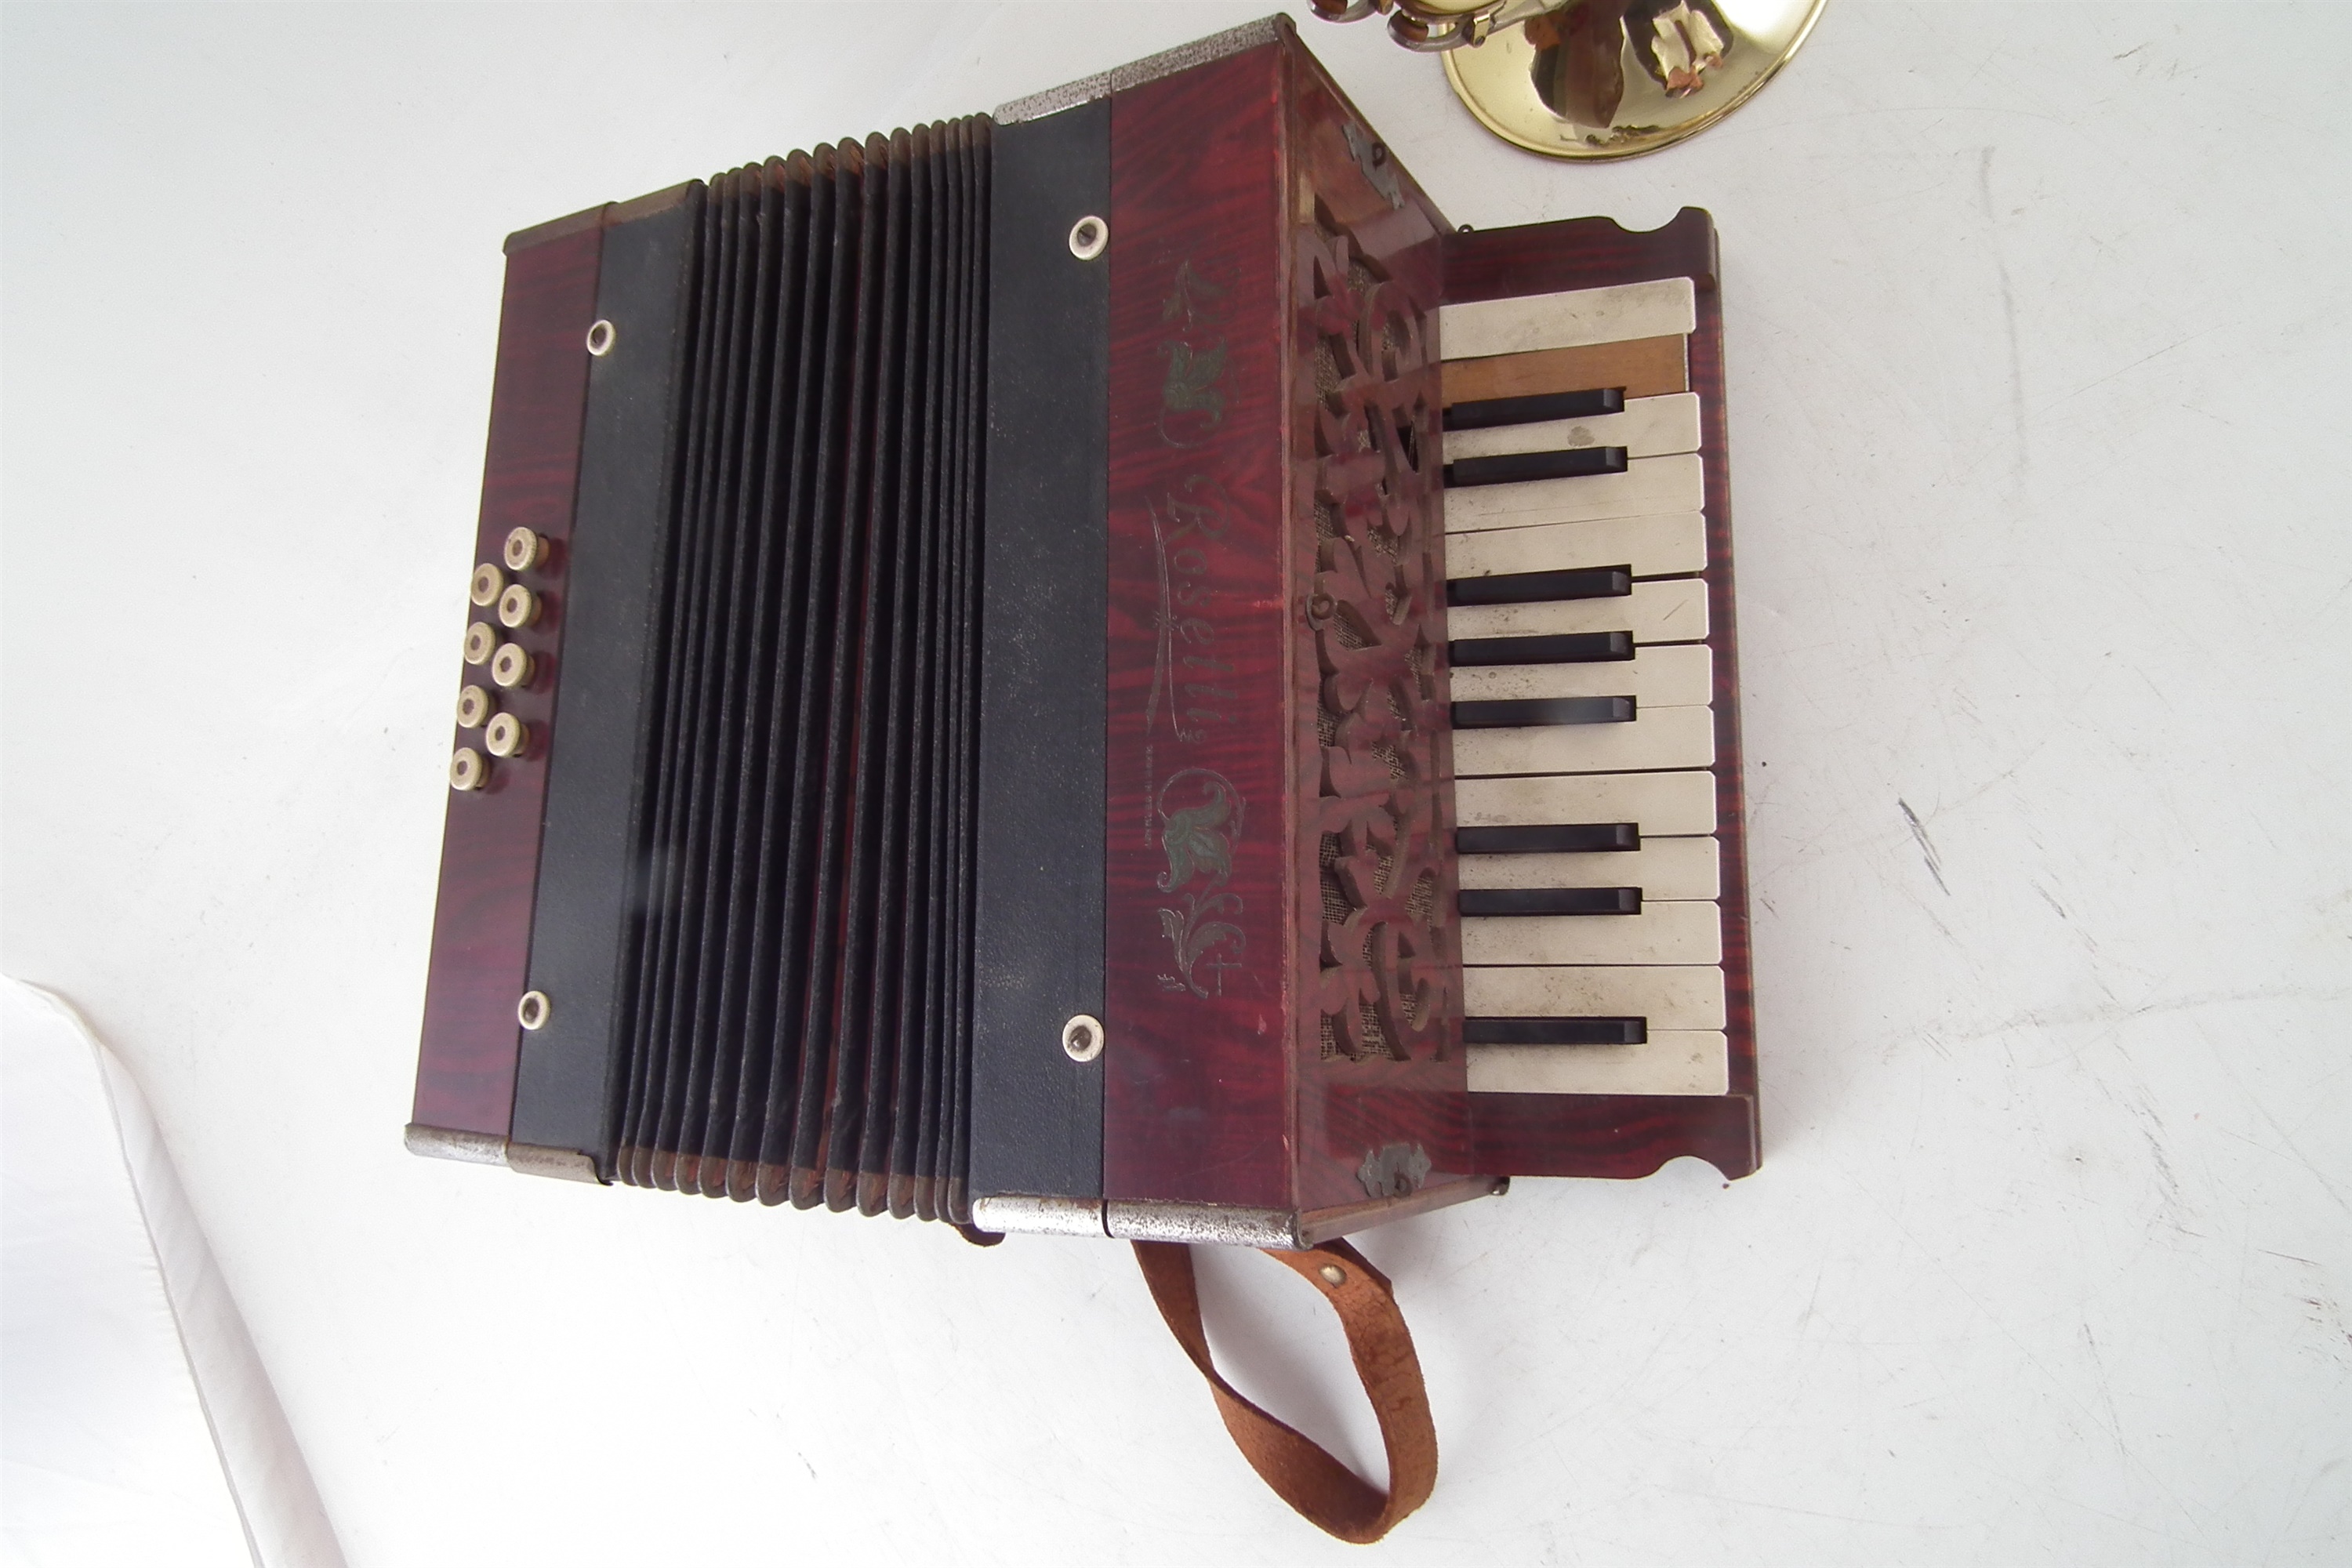 Odyssey trumpet in case and Rosetti piano accordion. - Image 2 of 6